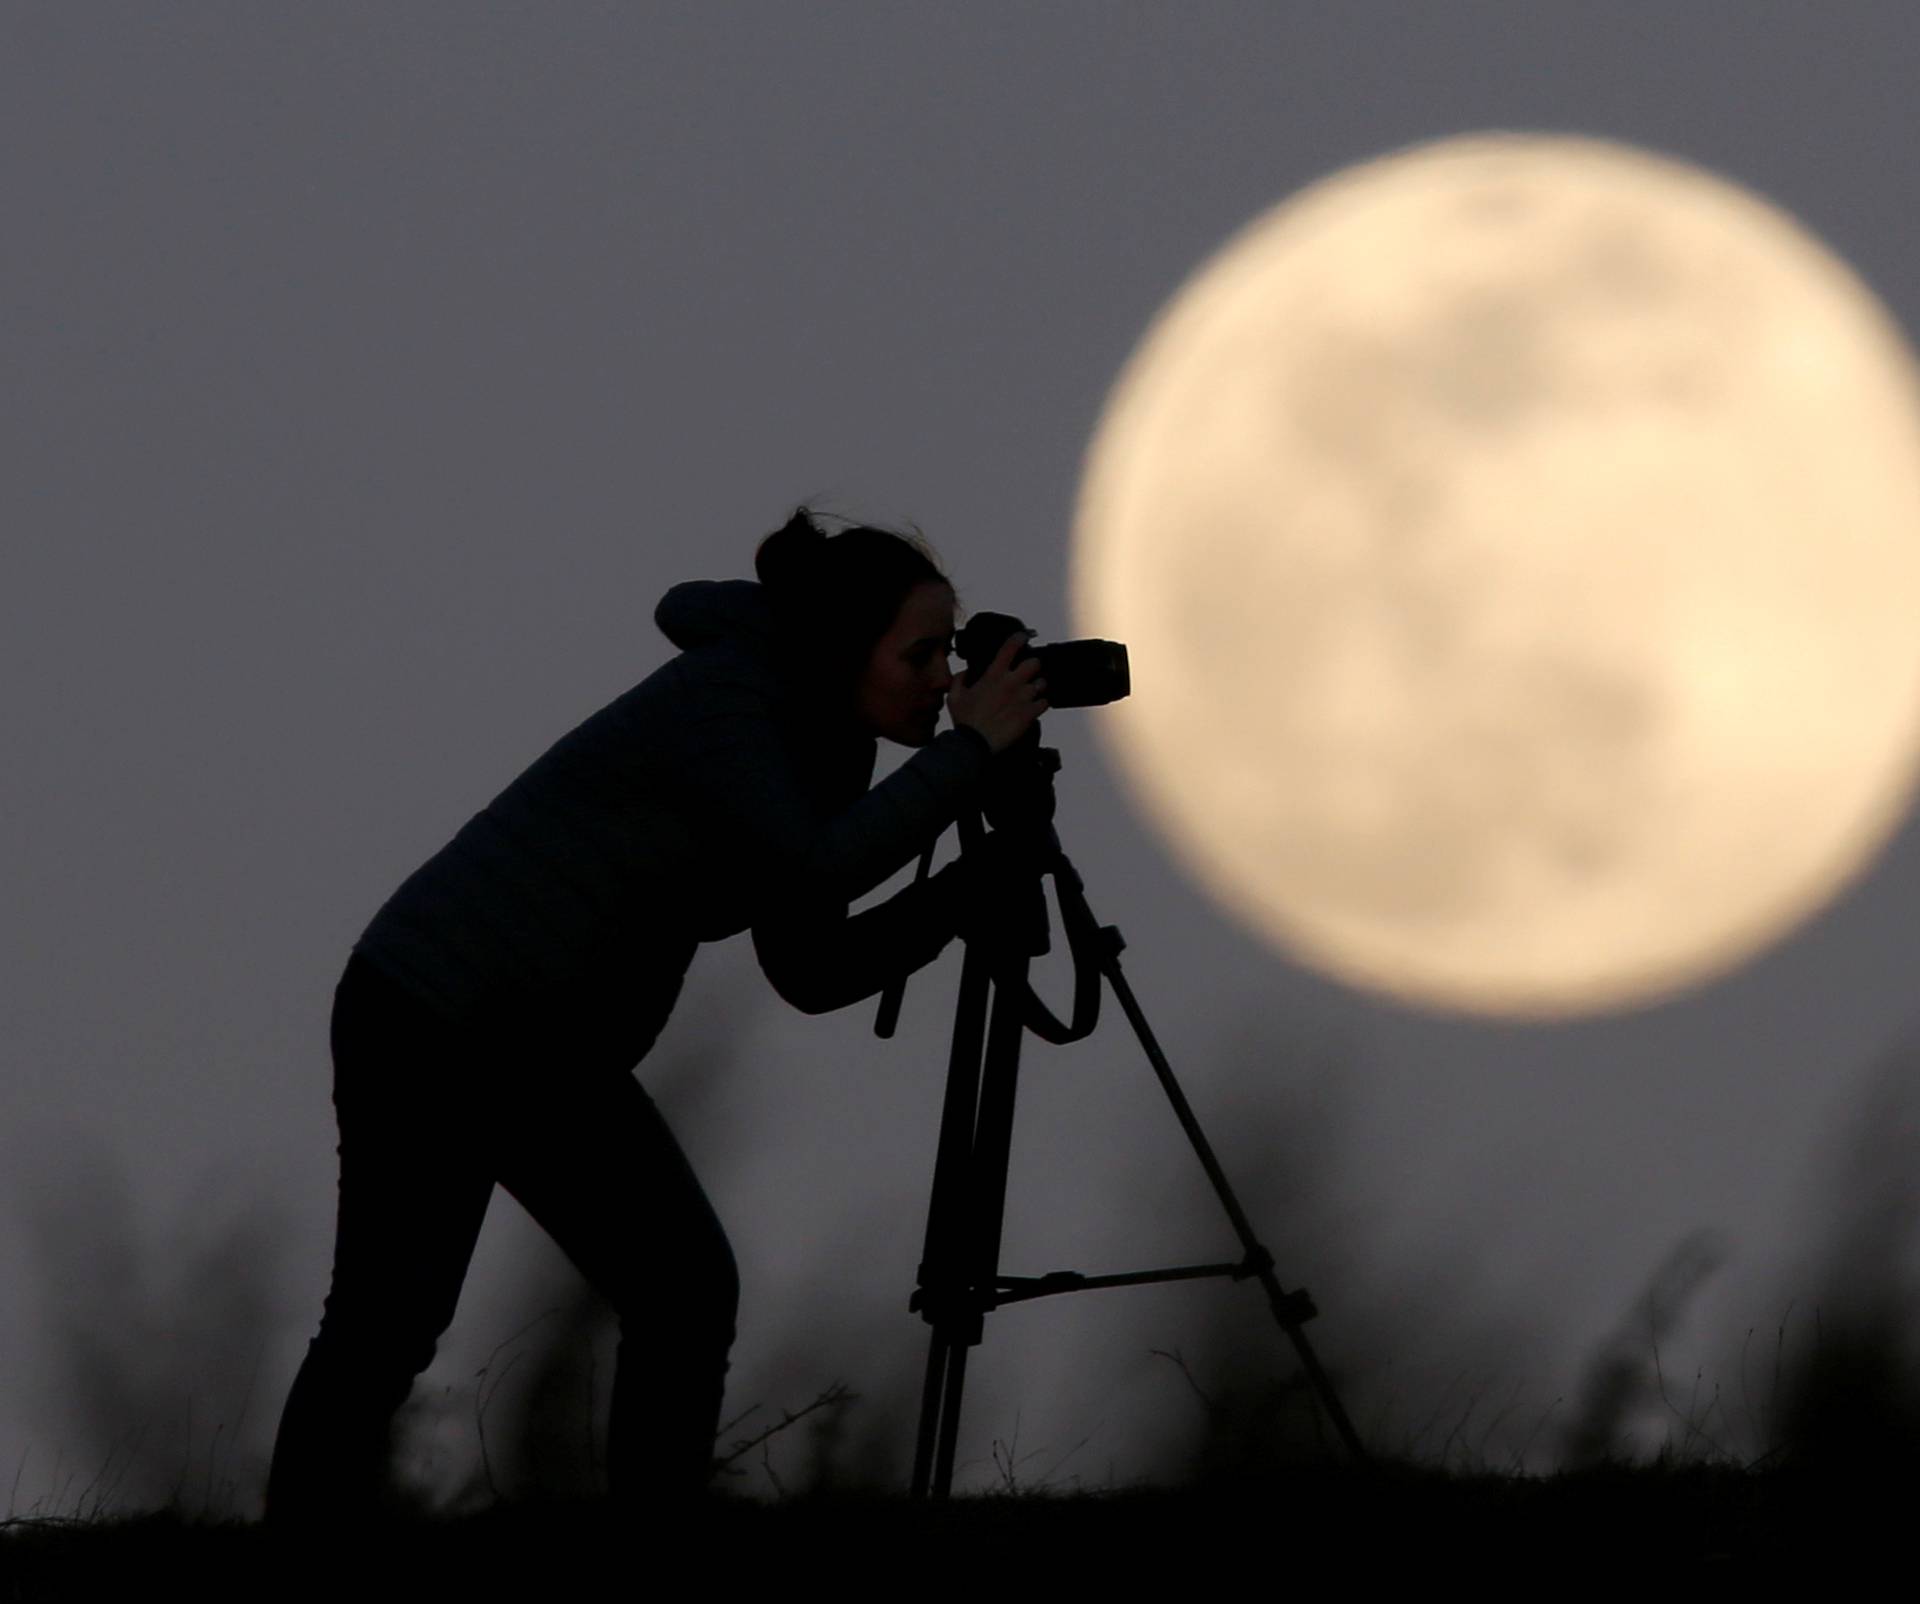 A woman photographs the Pink Supermoon over mountain Smetovi, during an astronomical event that occurs when the moon is closest to the Earth in its orbit, making it appear much larger and brighter than usual, in Zenica